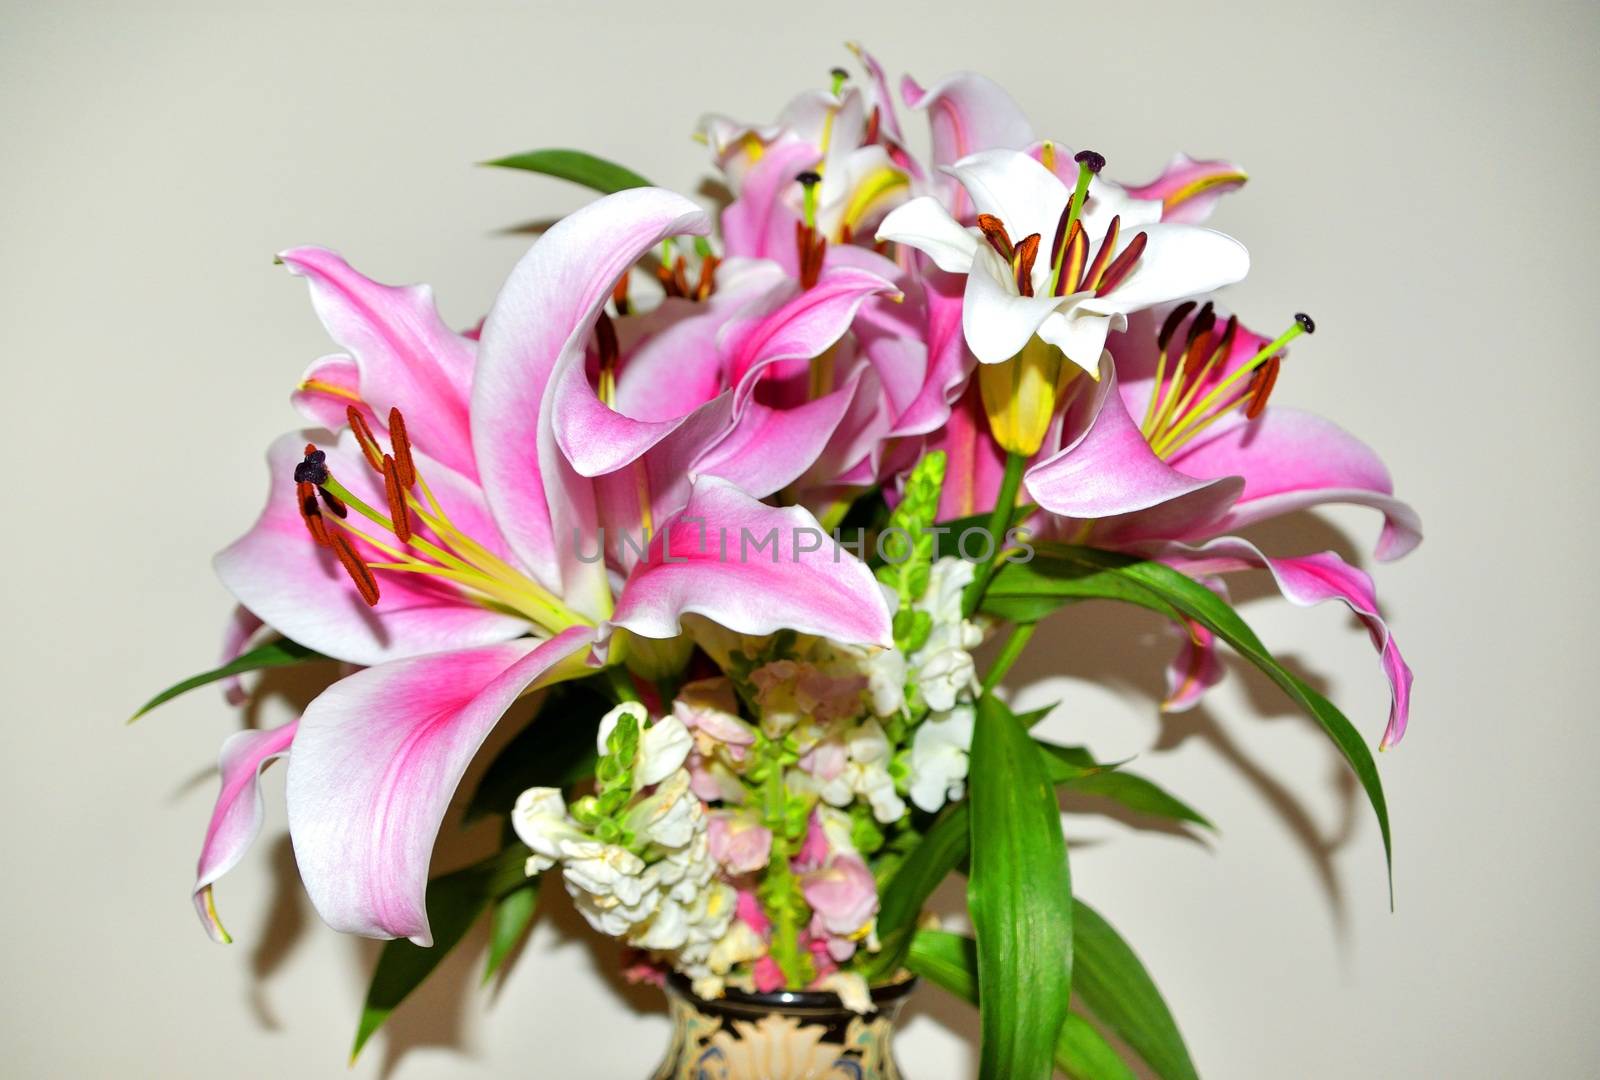 Lilies and Snapdragons on a white background